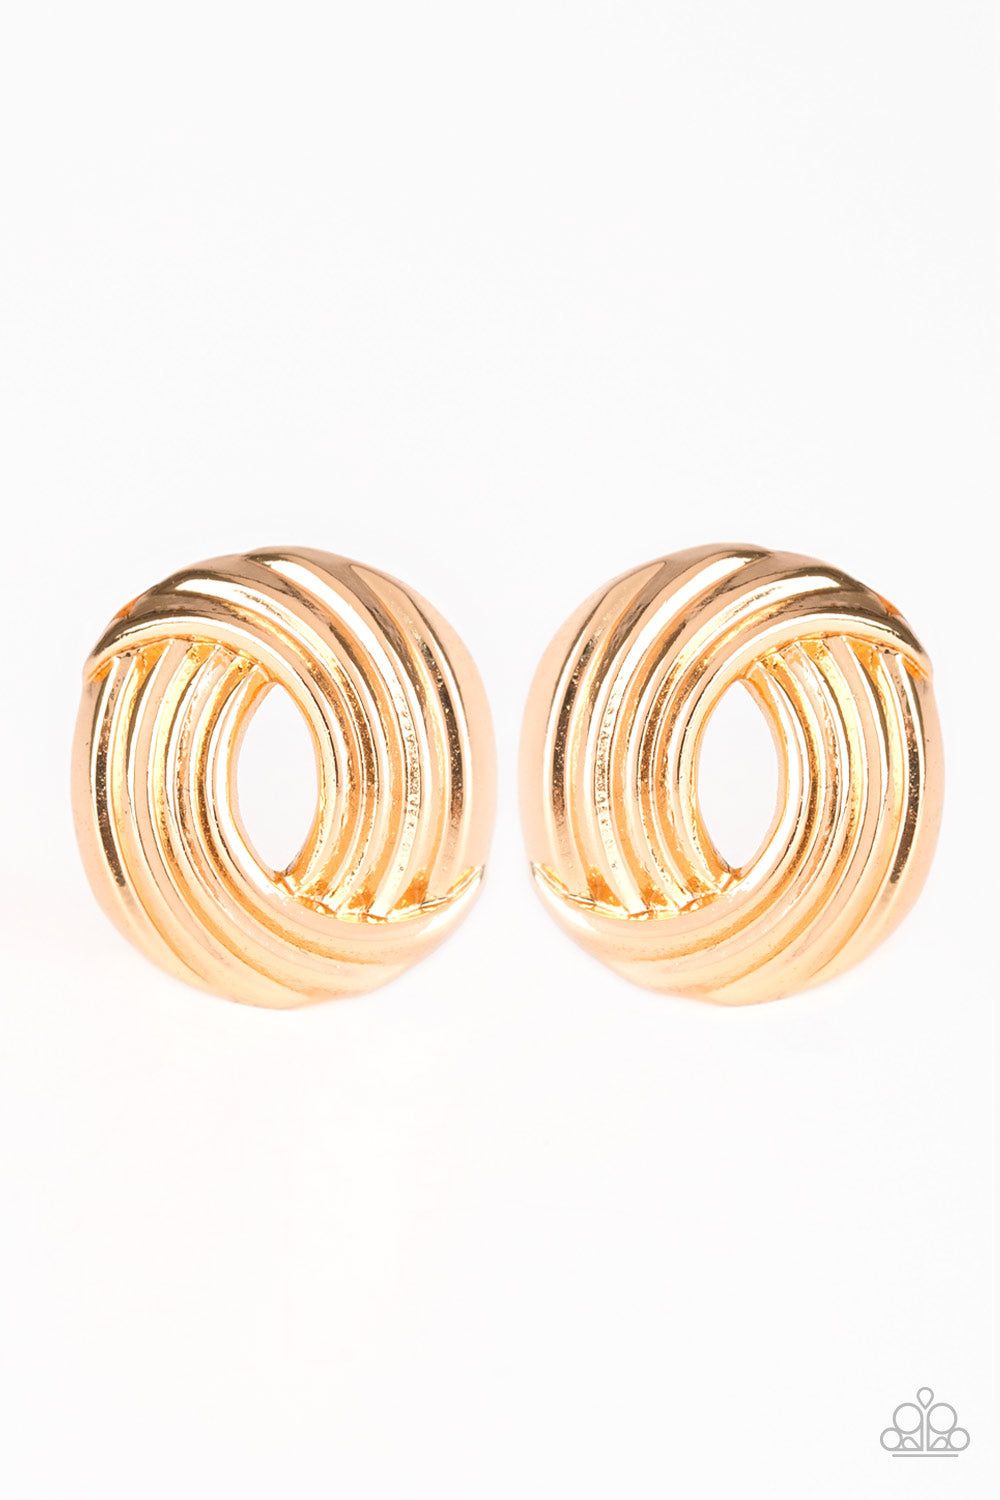 RARE REFINEMENT - GOLD POST EARRING